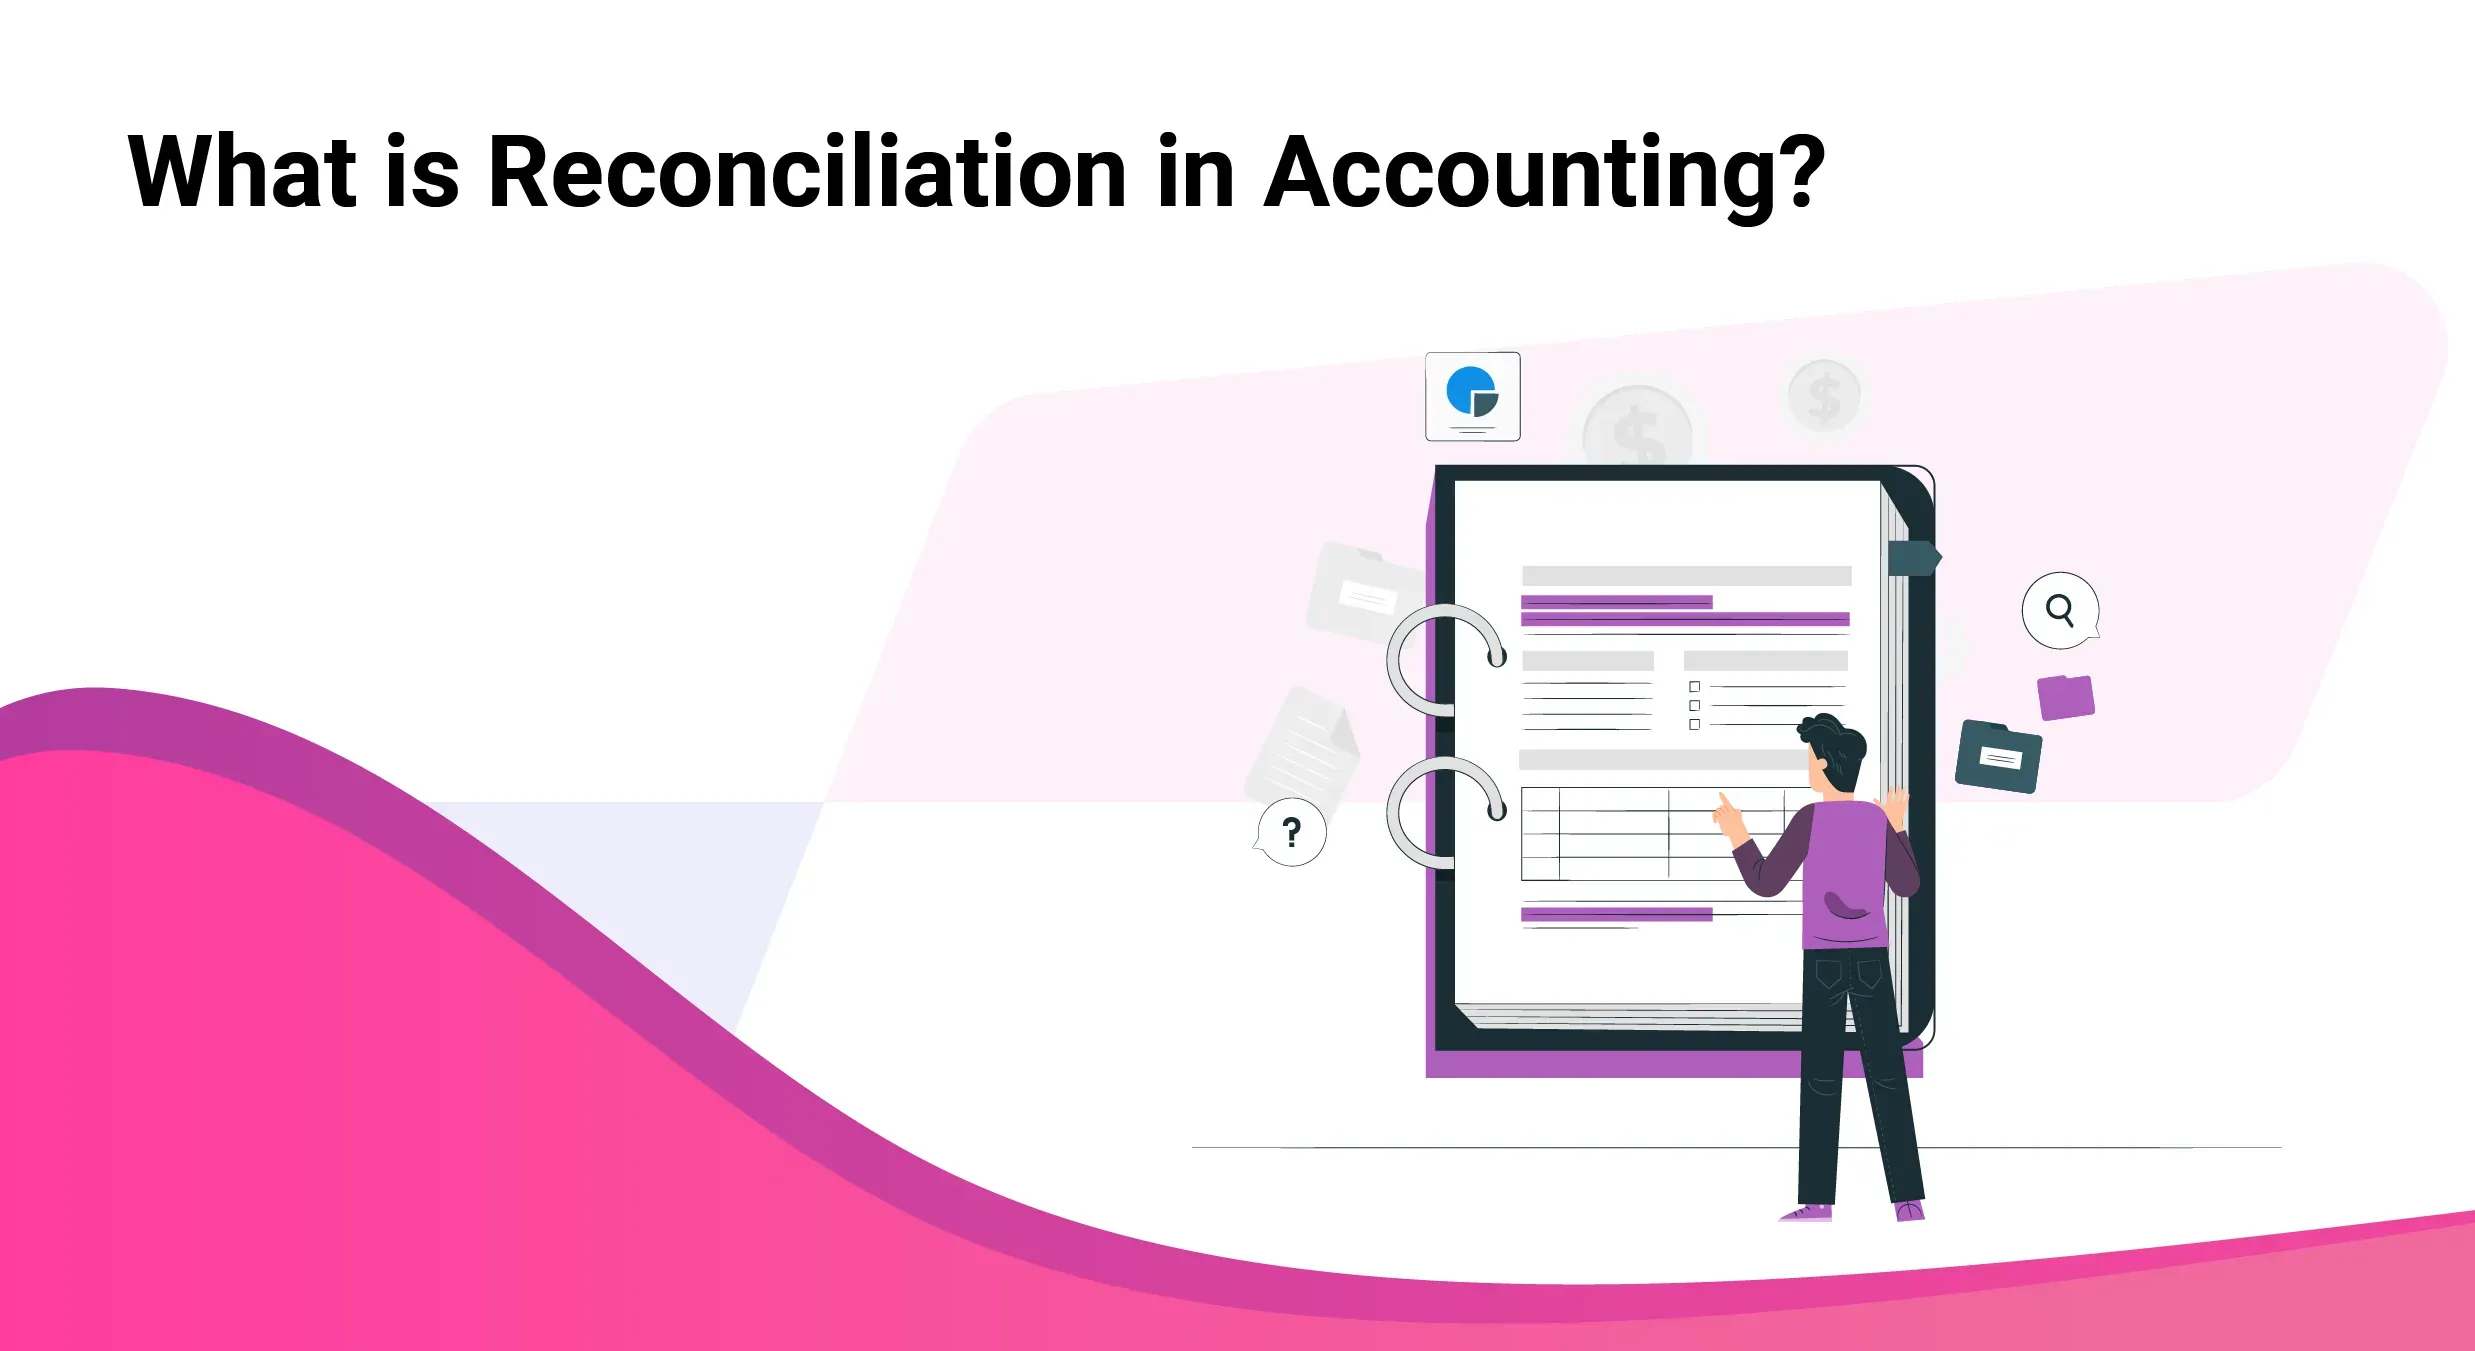 What is Reconciliation in Accounting